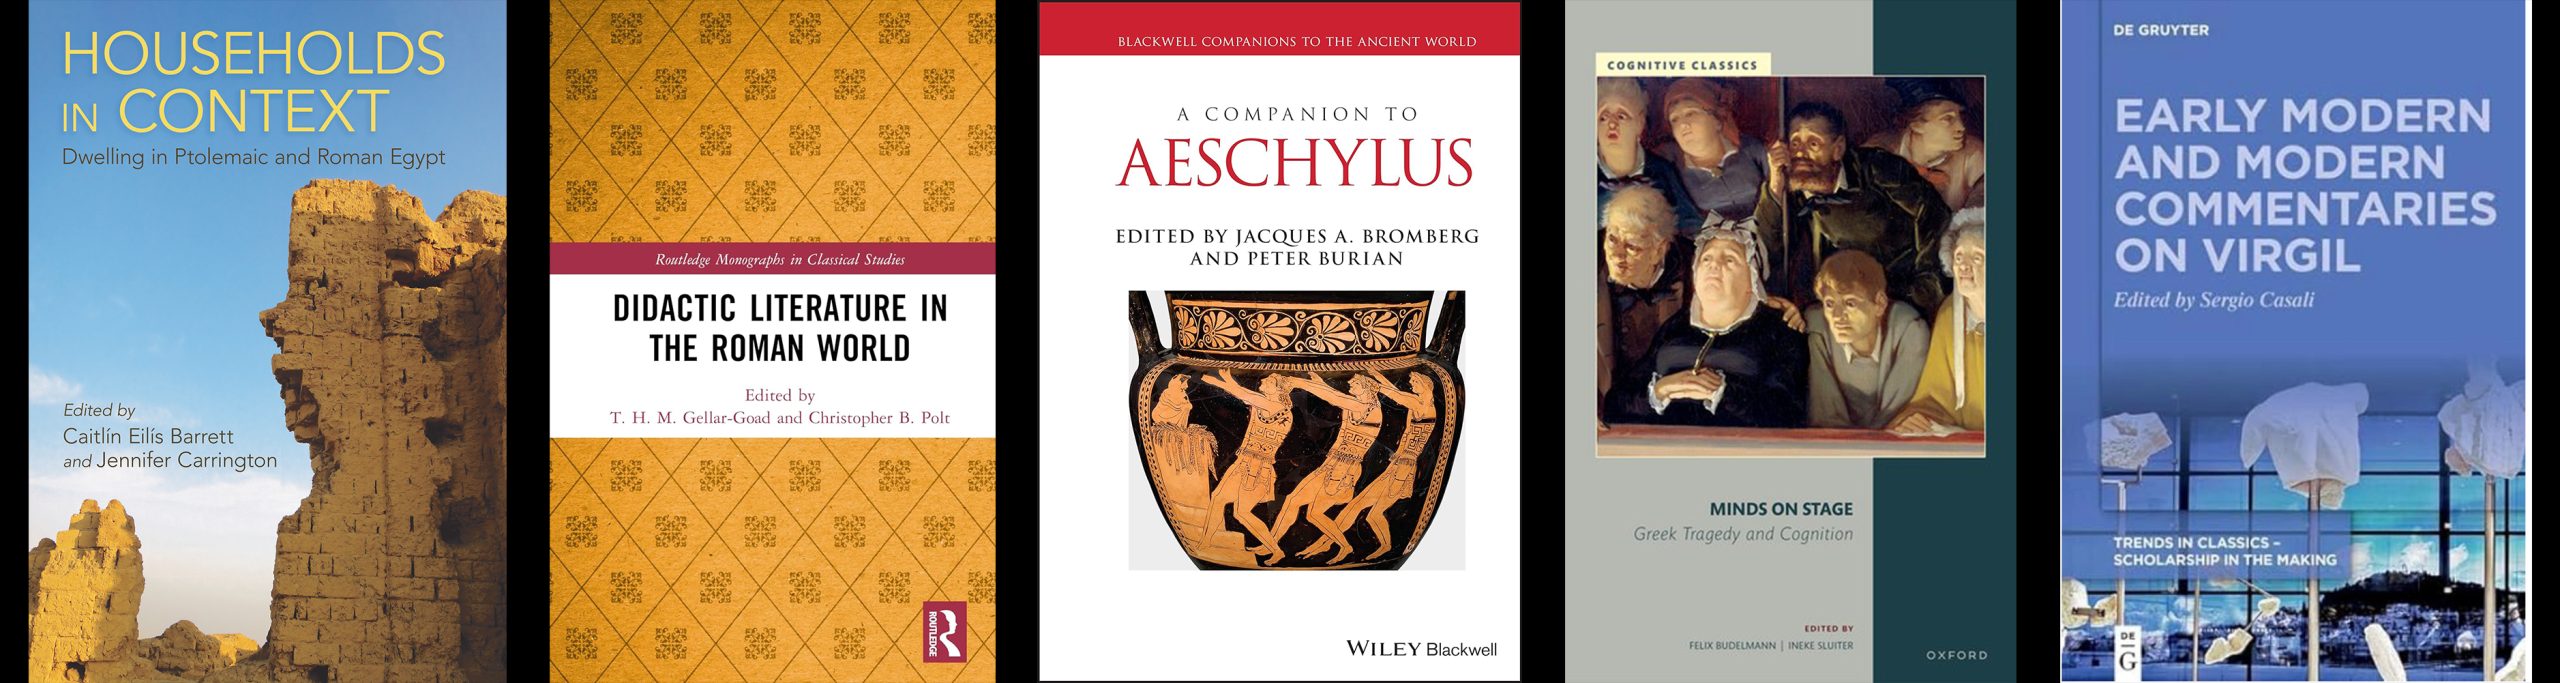 1. Households in Context: Dwelling in Ptolemaic and Roman Egypt, edited by Caitlin Ellis Barrett and Jennifer Carrington. 2. Didactic Literature in the Roman World, edited by T.H.M. Gellar-Good and Christopher B. Polt. 3. A Companion to Aeschylus, edited by Jacques A. Bromberg and Peter Burian. 4. Minds on Stage: Greek Tragedy and Cognition. 5. Early Modern and Modern Commentaries on Virgil, edited by Sergio Casali.